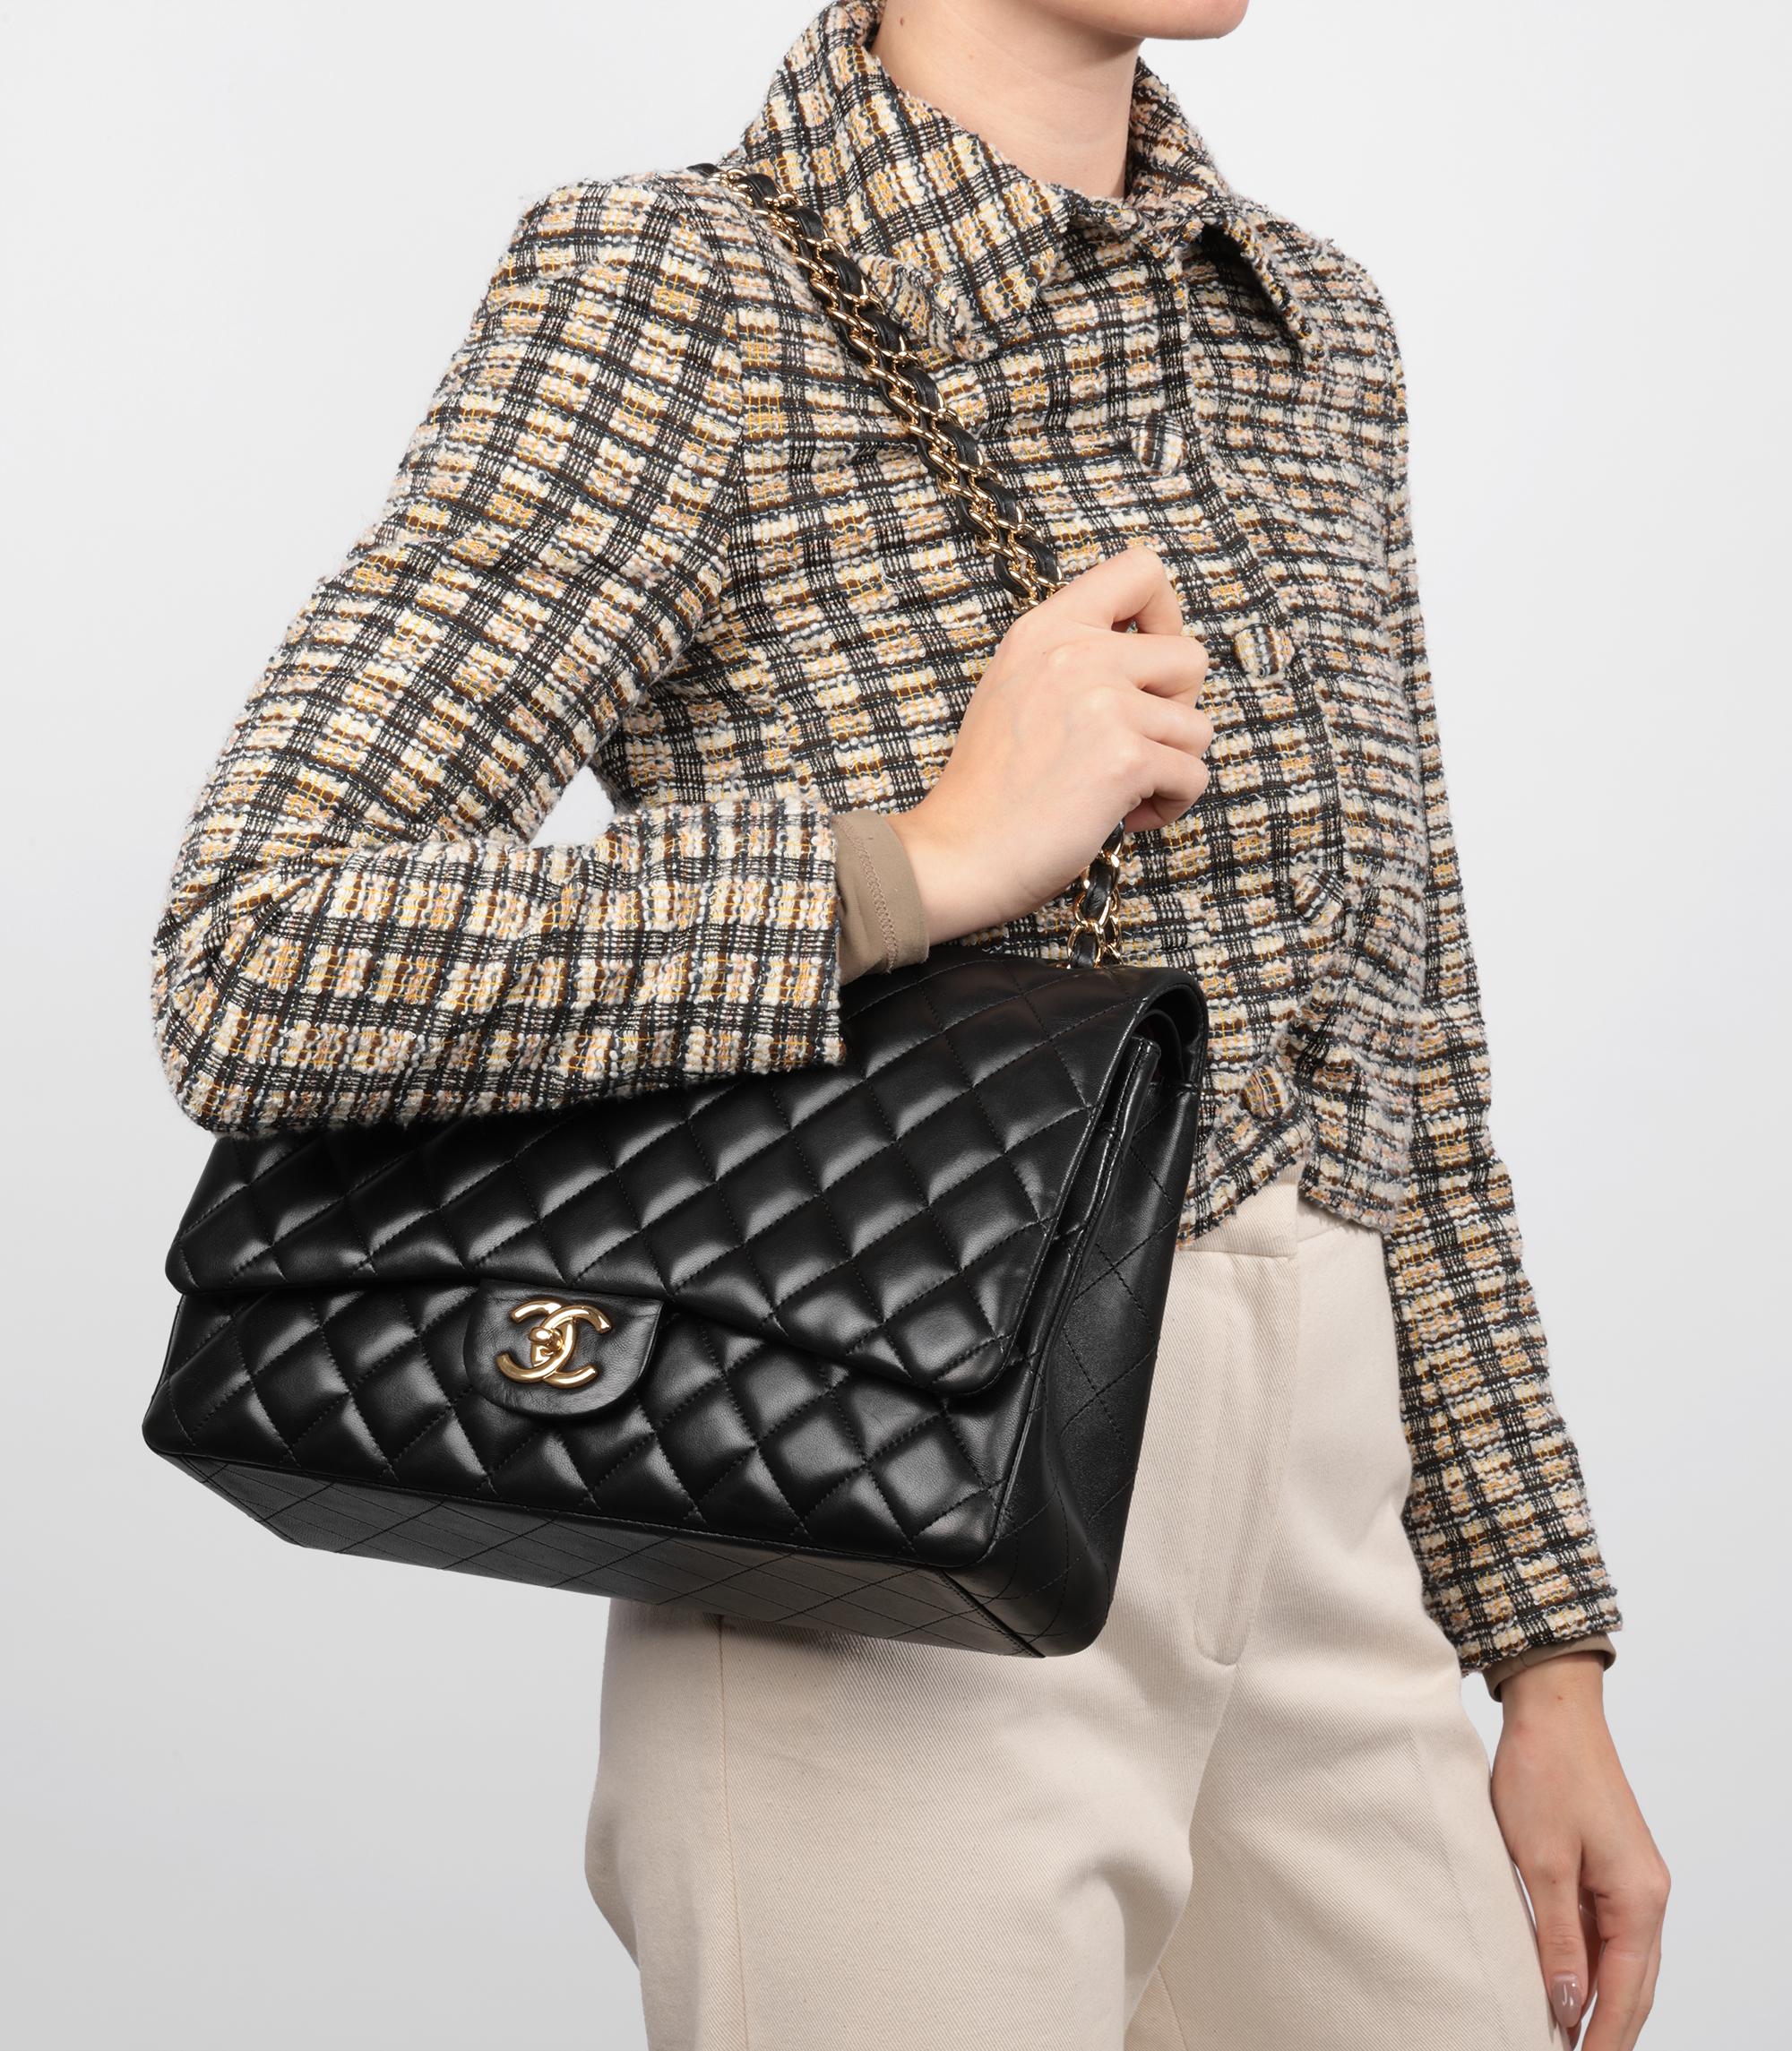 Chanel Black Quilted Lambskin Maxi Classic Double Flap Bag

Model- Maxi Classic Double Flap Bag
Product Type- Crossbody, Shoulder
Serial Number- 15******
Age- Circa 2011
Accompanied By- Chanel Dust Bag, Care Booklet, Authenticity Card, Protective